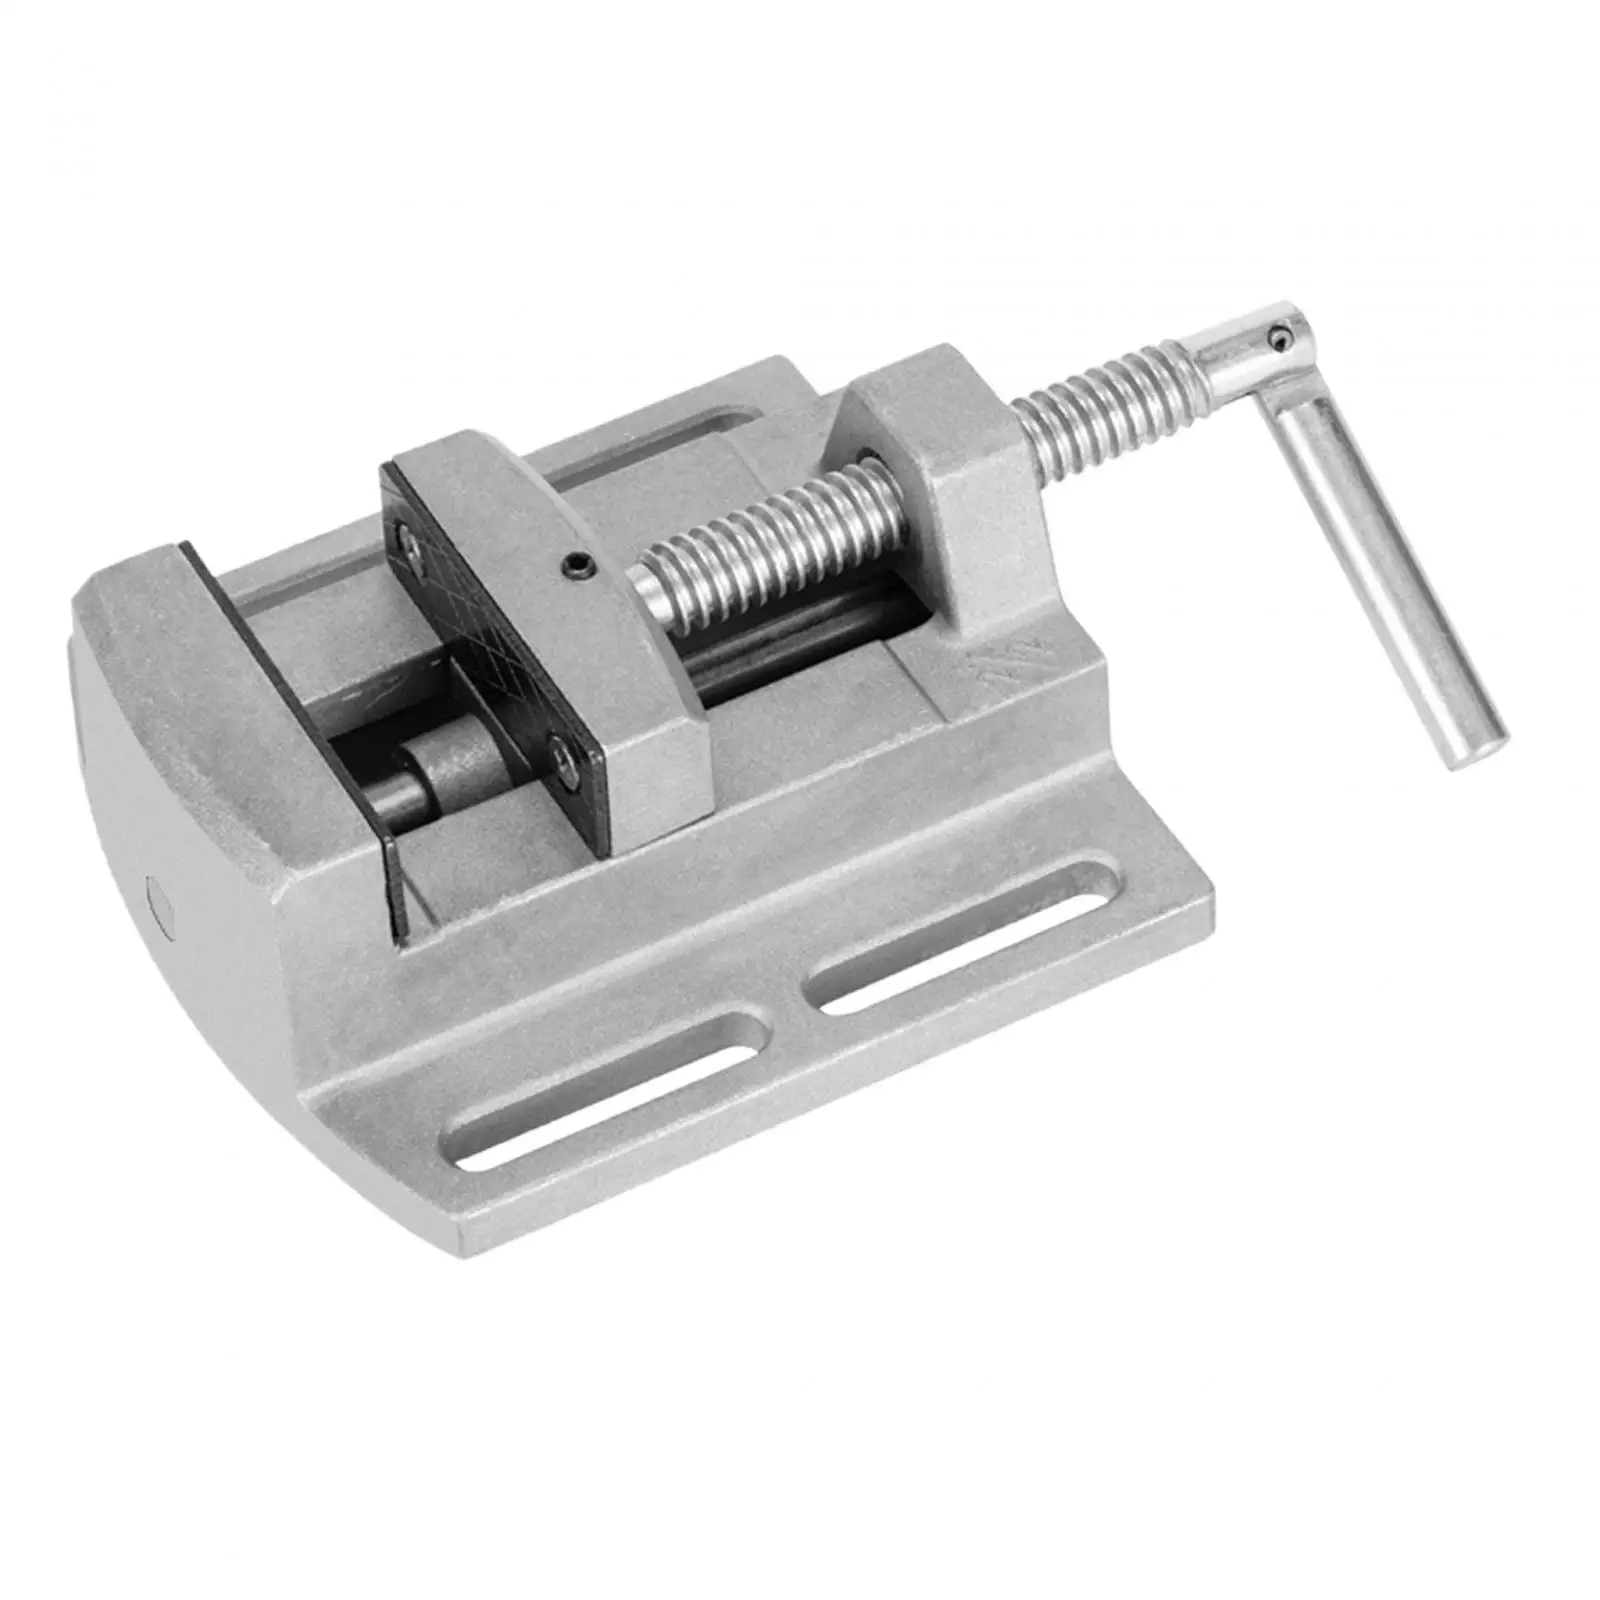 Drill Press Vise Building Work DIY Drilling Model Making Vise Clamp on Vise Jewelry Making Model Carving Tool Parallel Jaw Vice